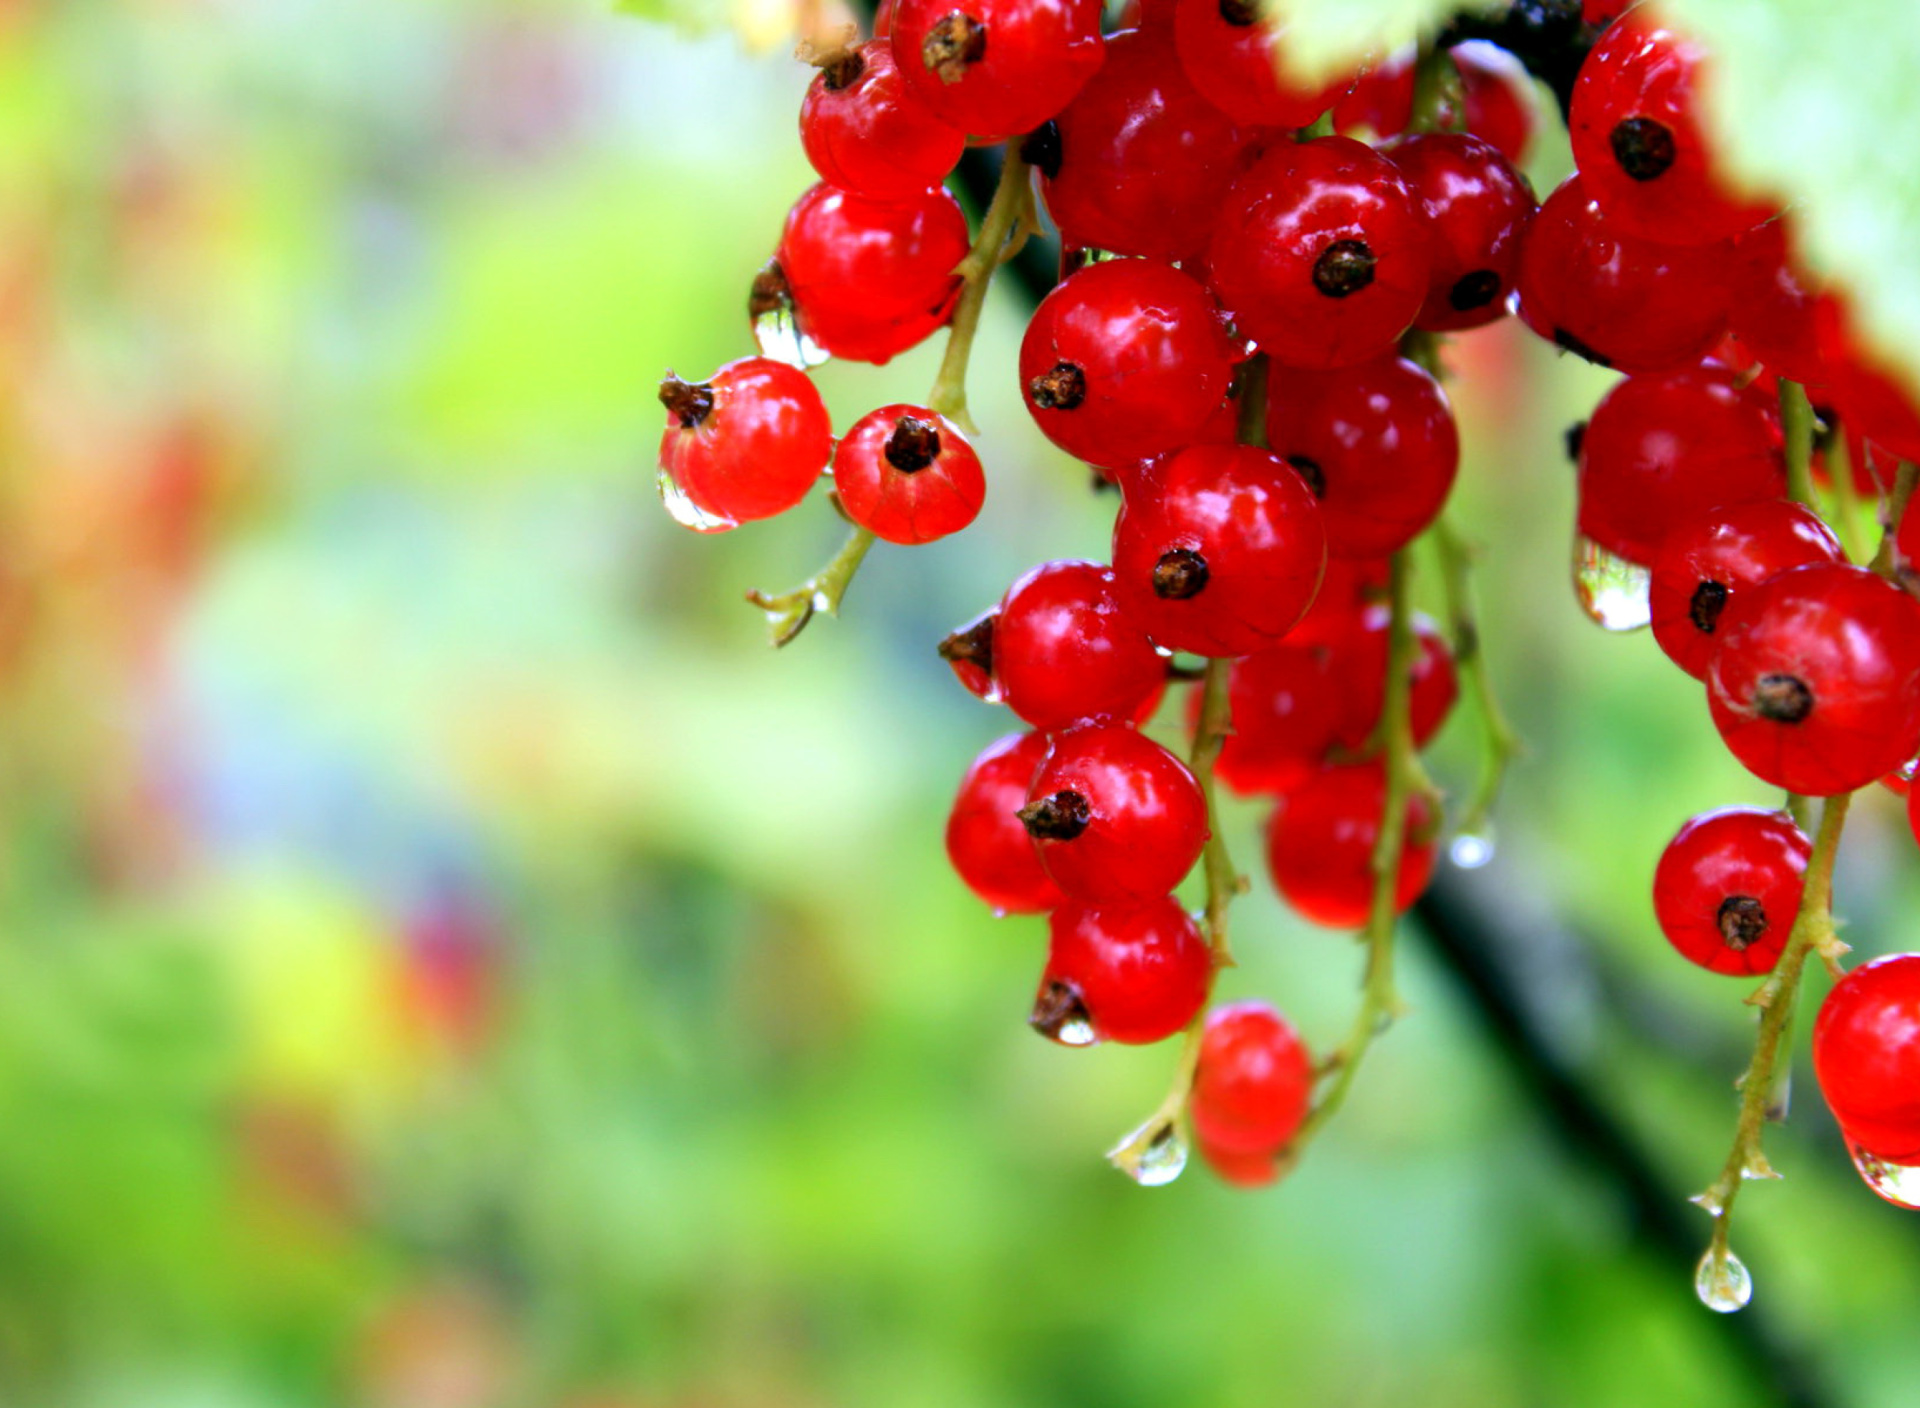 Red currant with Dew screenshot #1 1920x1408